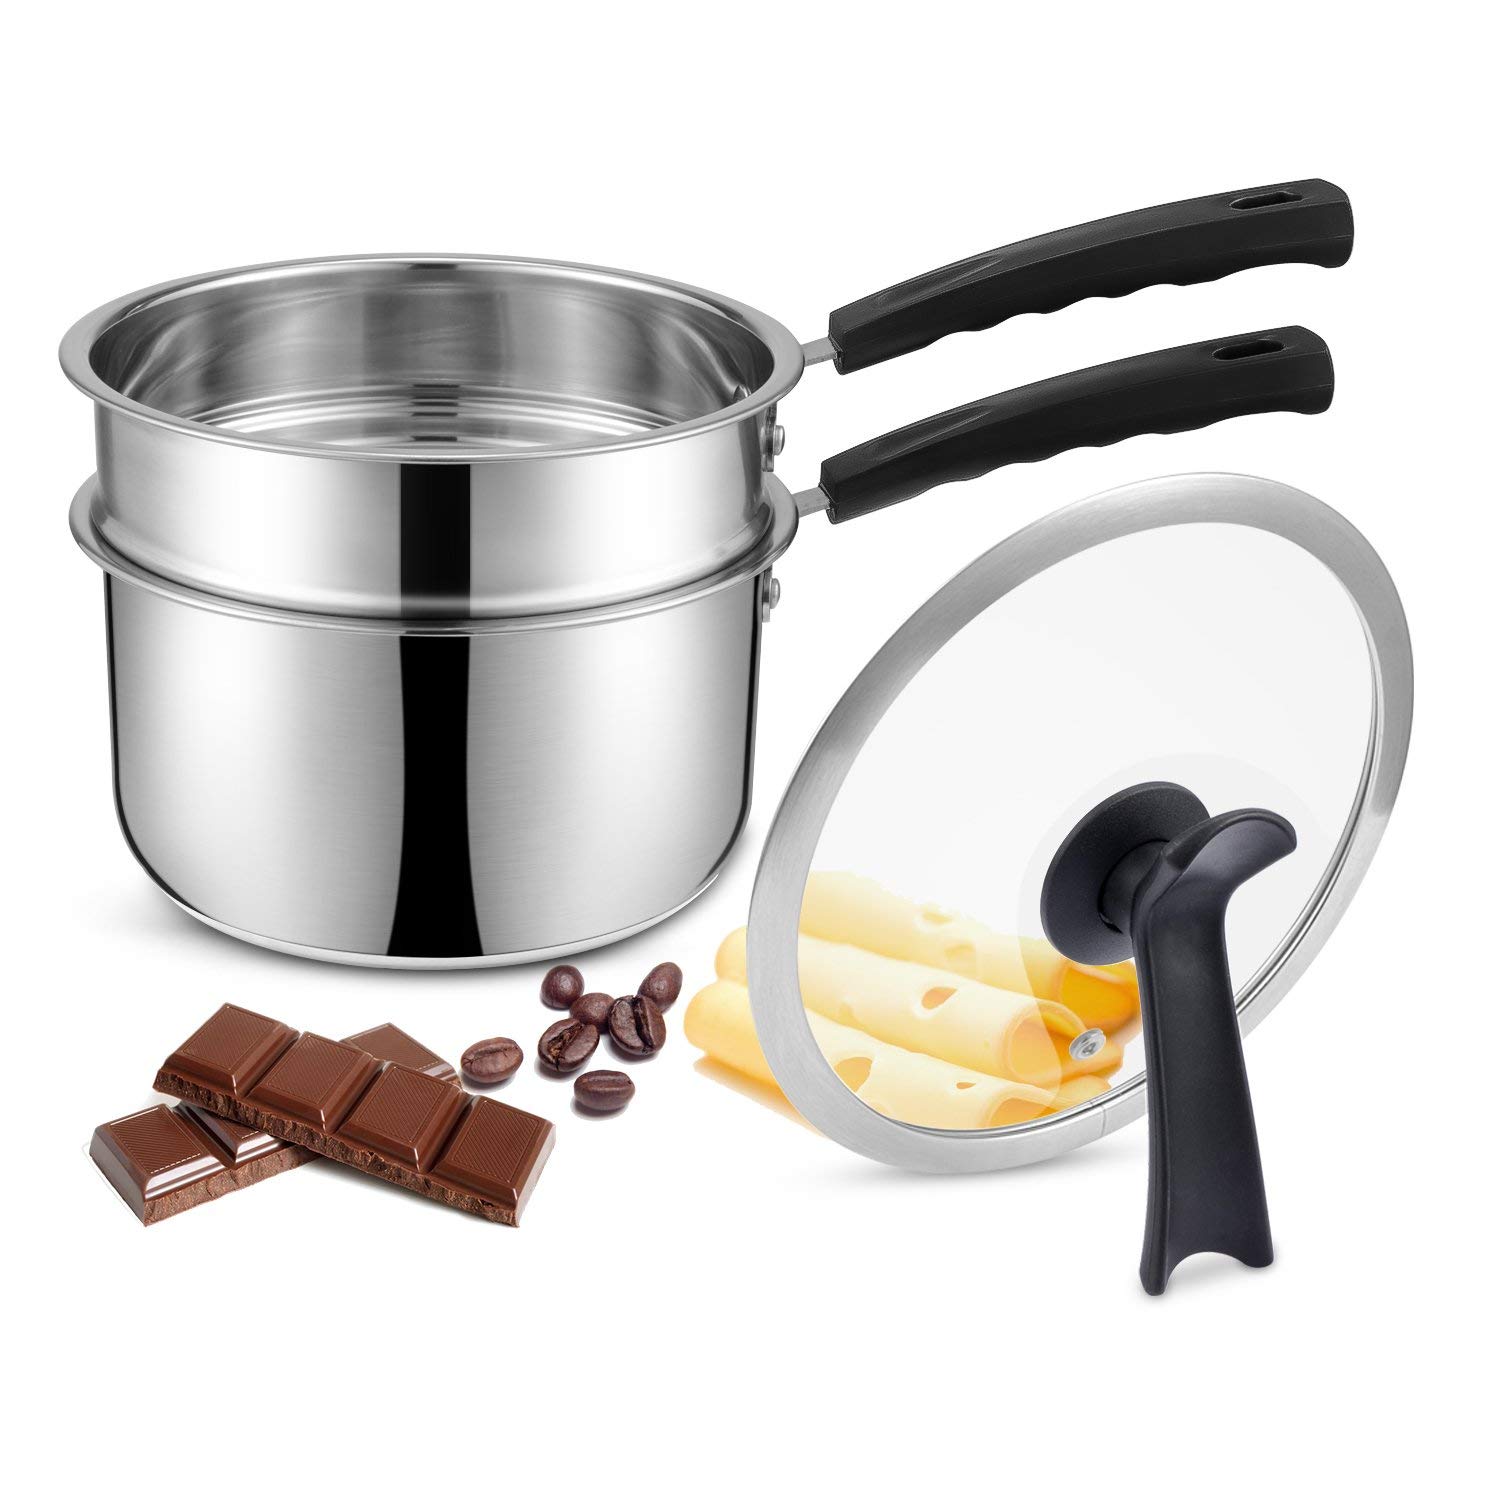 Double Boiler&Classic Stainless Steel Non-Stick Saucepan,Melting Pot for Butter,Chocolate,Cheese,Caramel and Bonus with Tempered Glass Lid